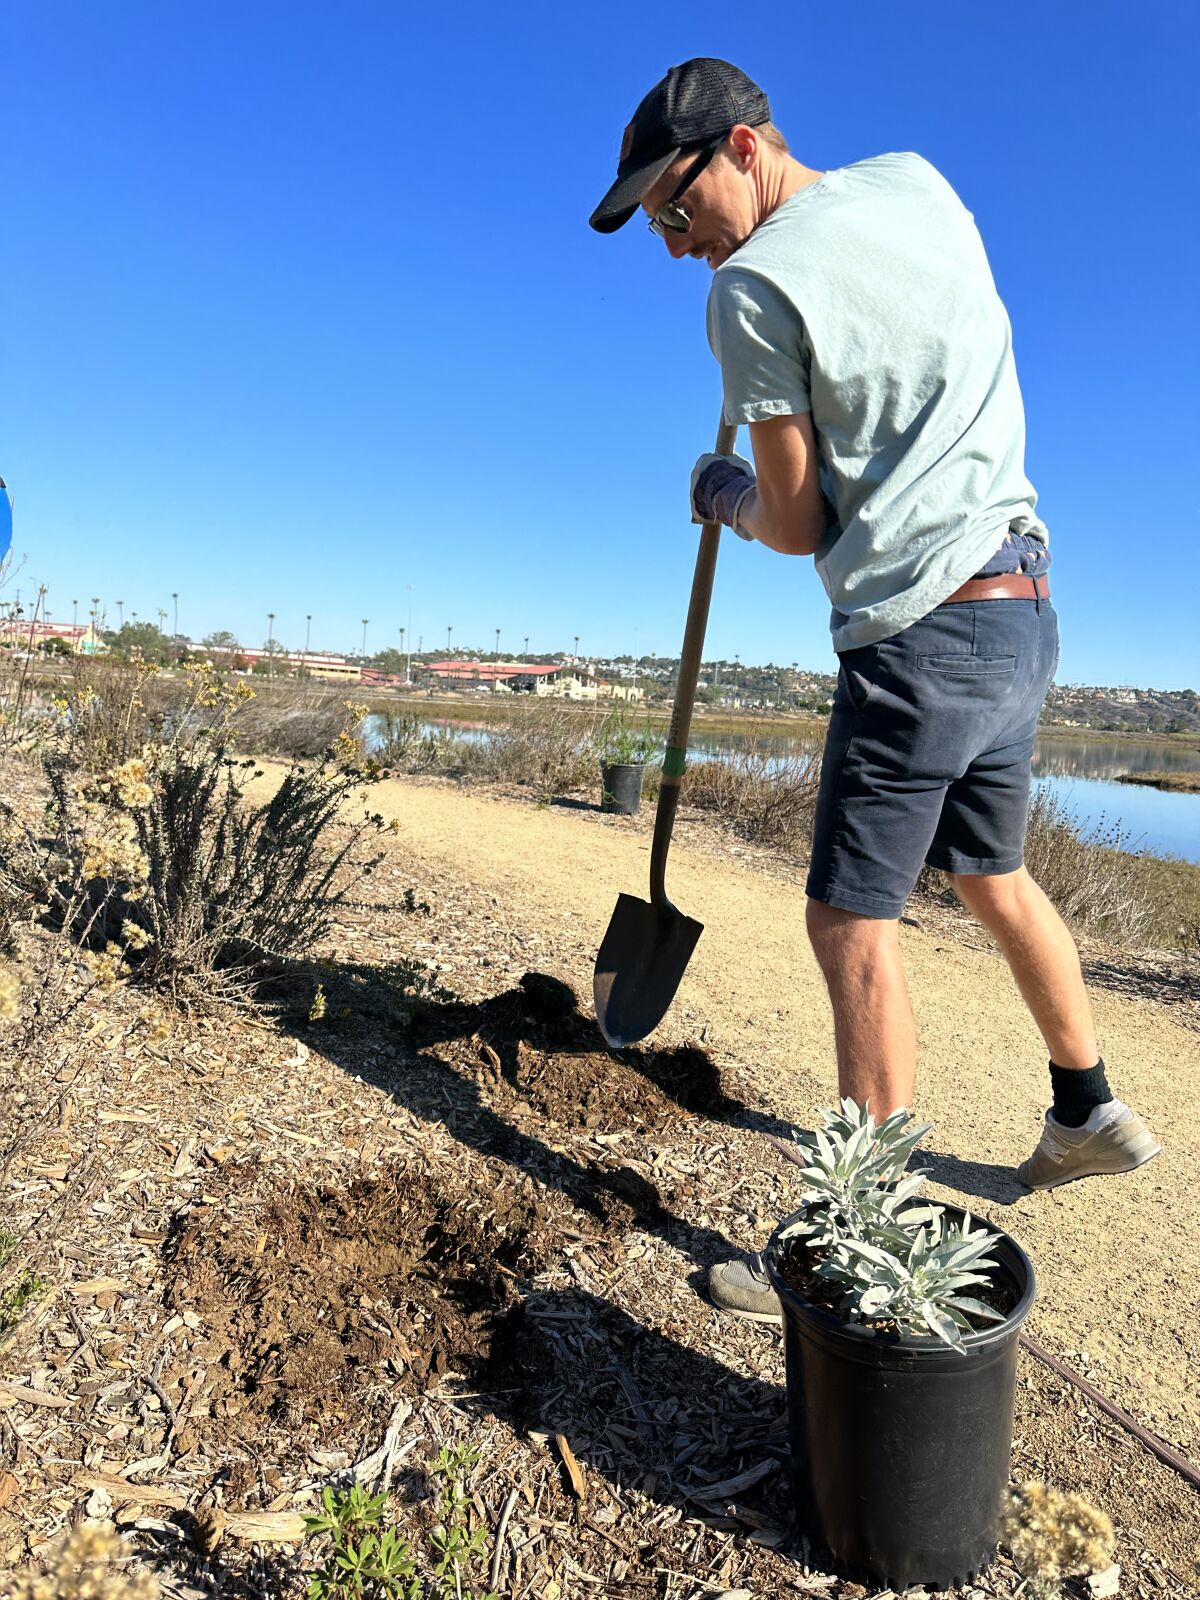 Wildcoast brought together several local organizations and volunteers to help restore blue carbon at River Path Del Mar.